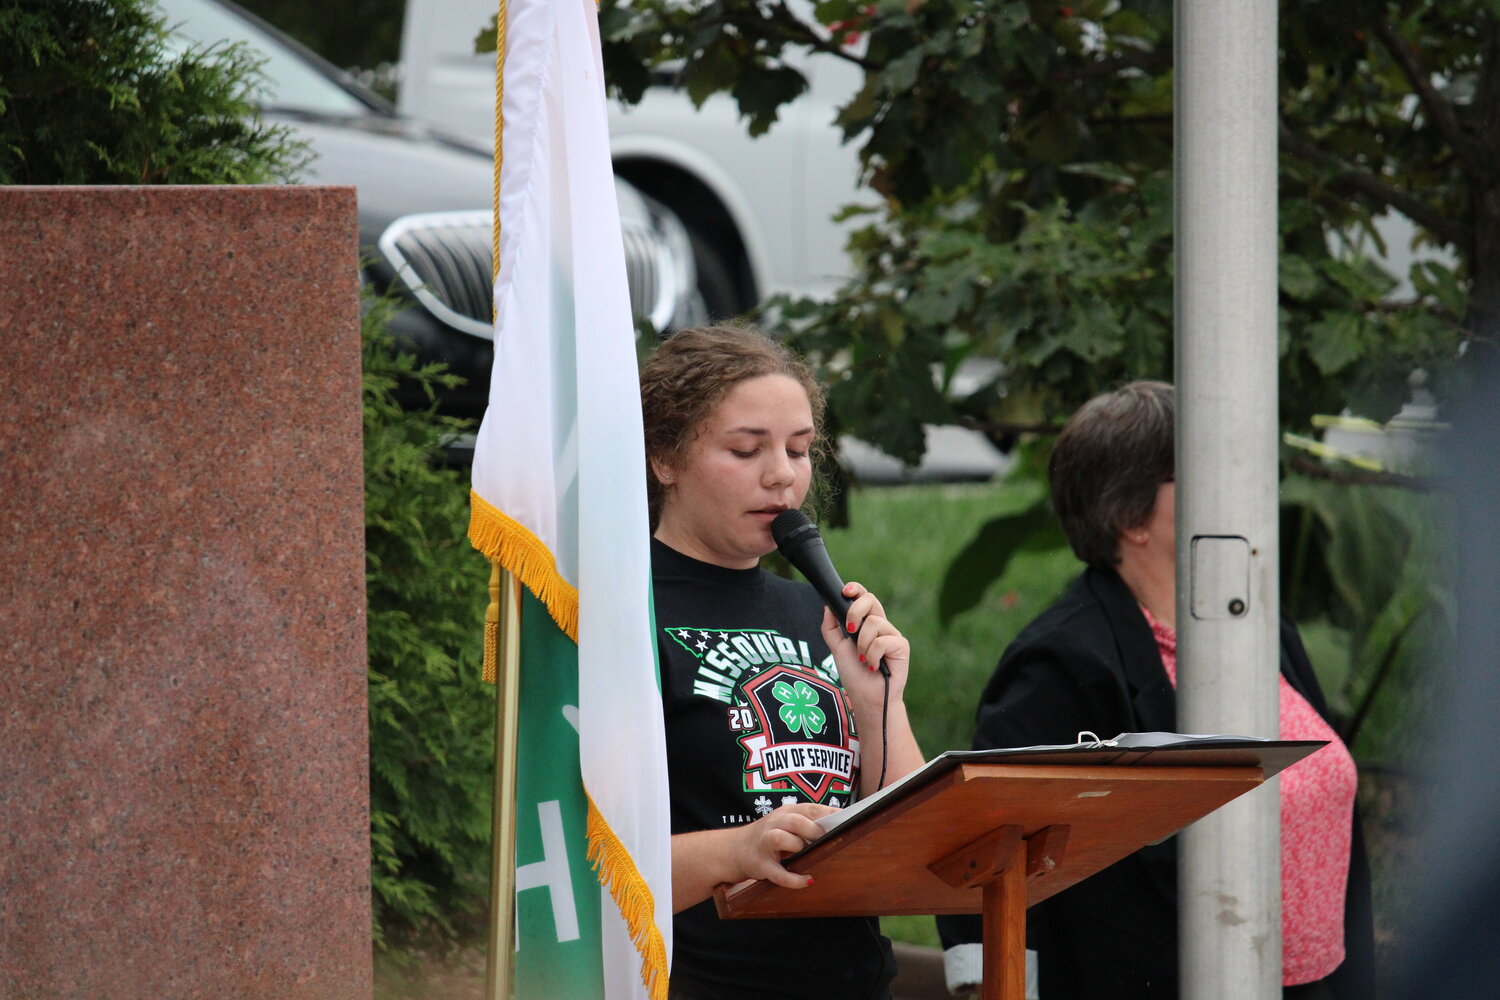 Madison Dent leads the Sept. 11 ceremony.